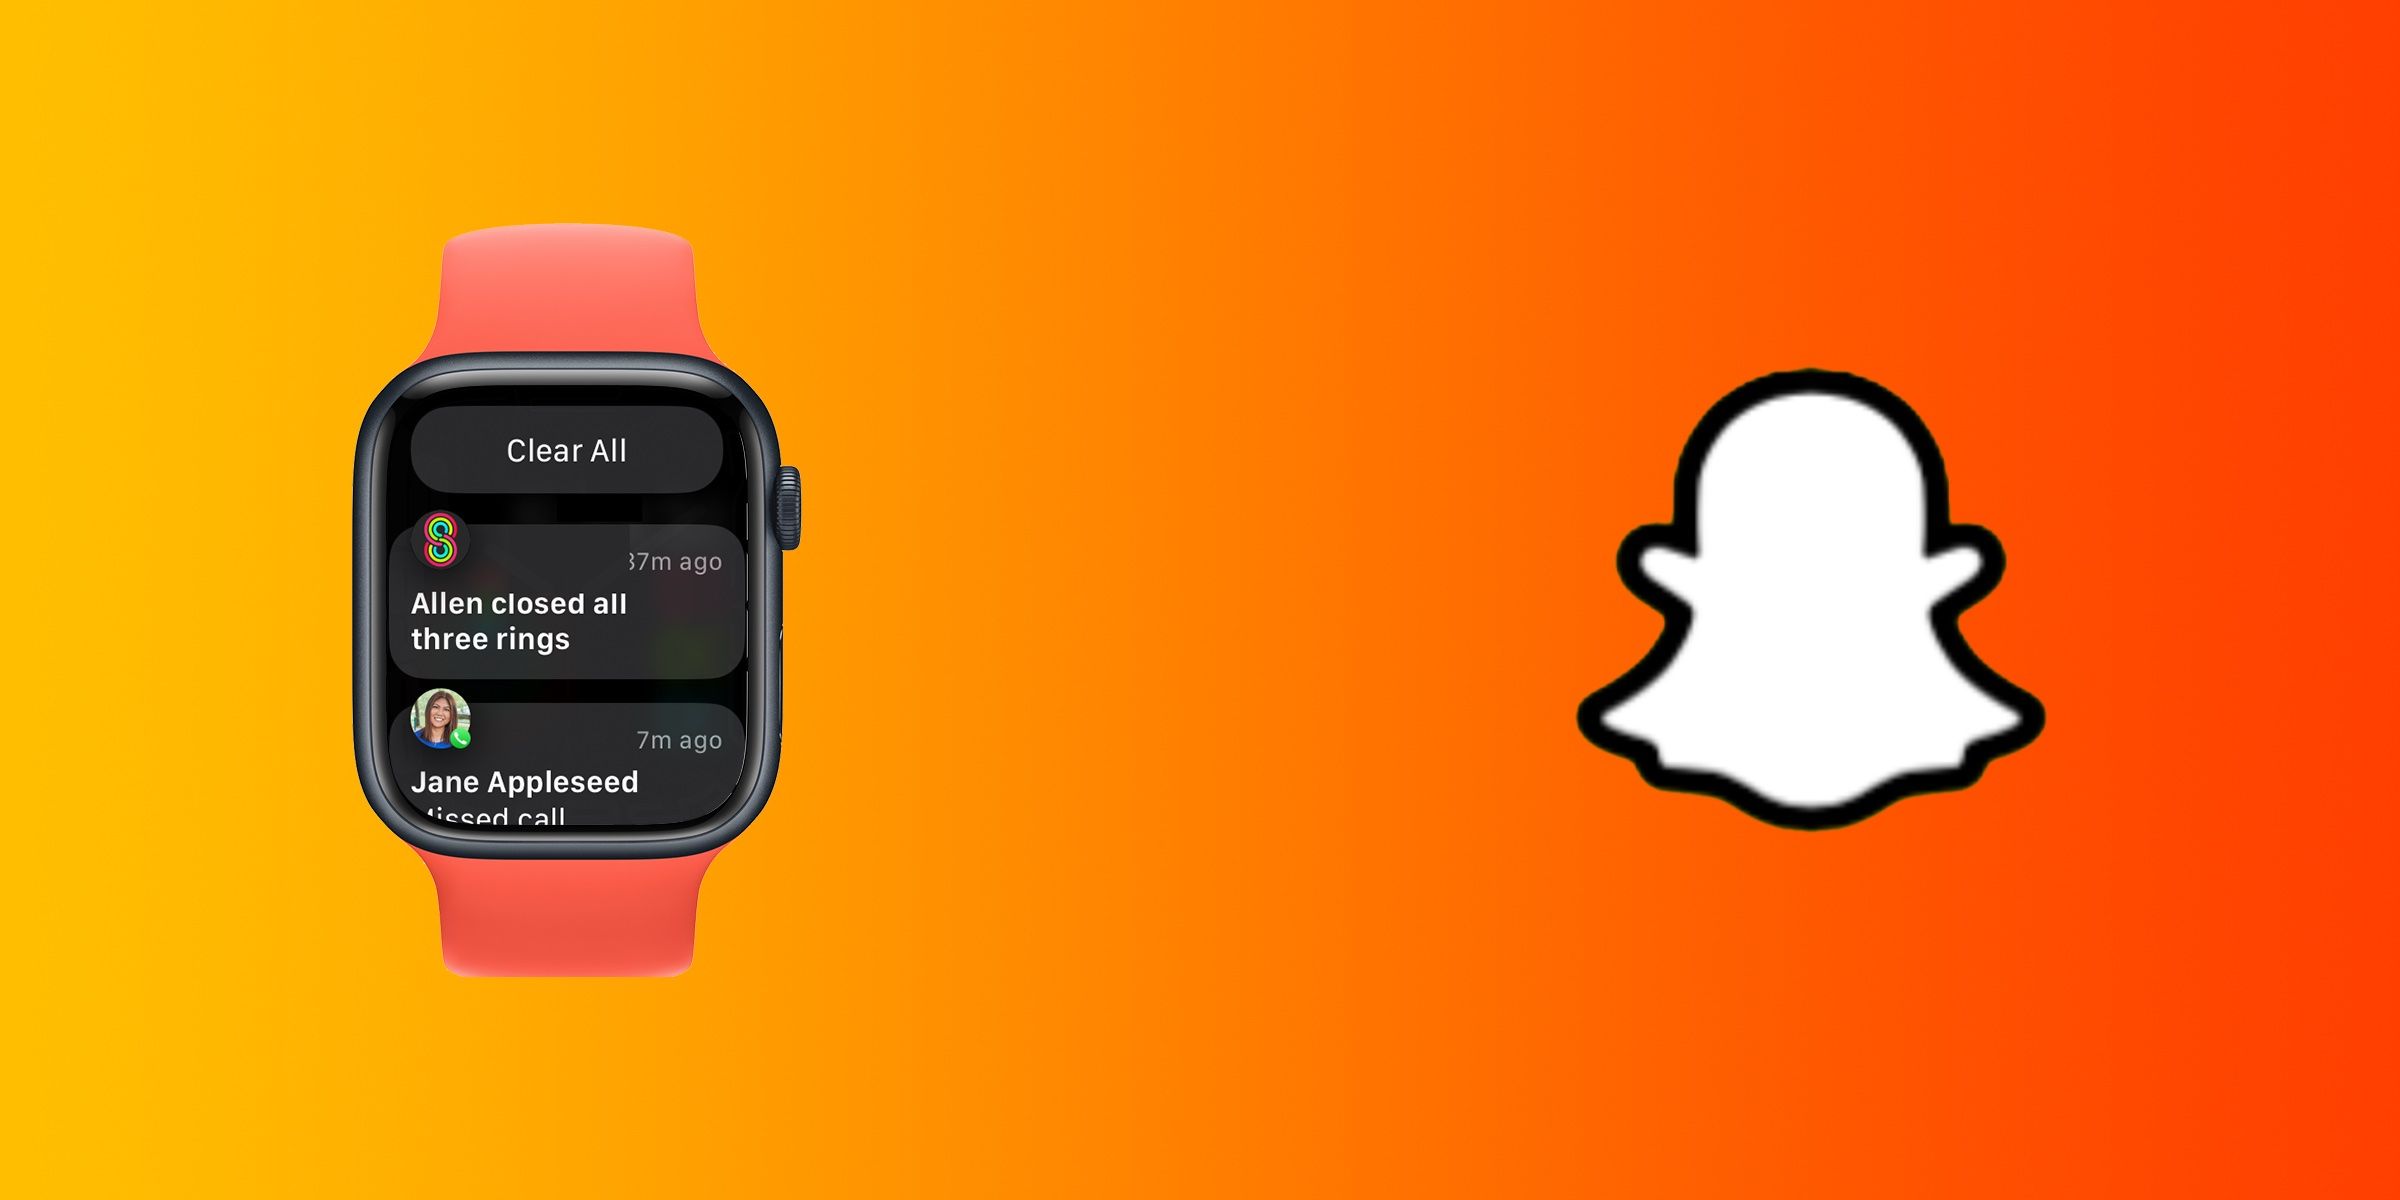 An Apple Watch's Notification Center beside the Snapchat logo.